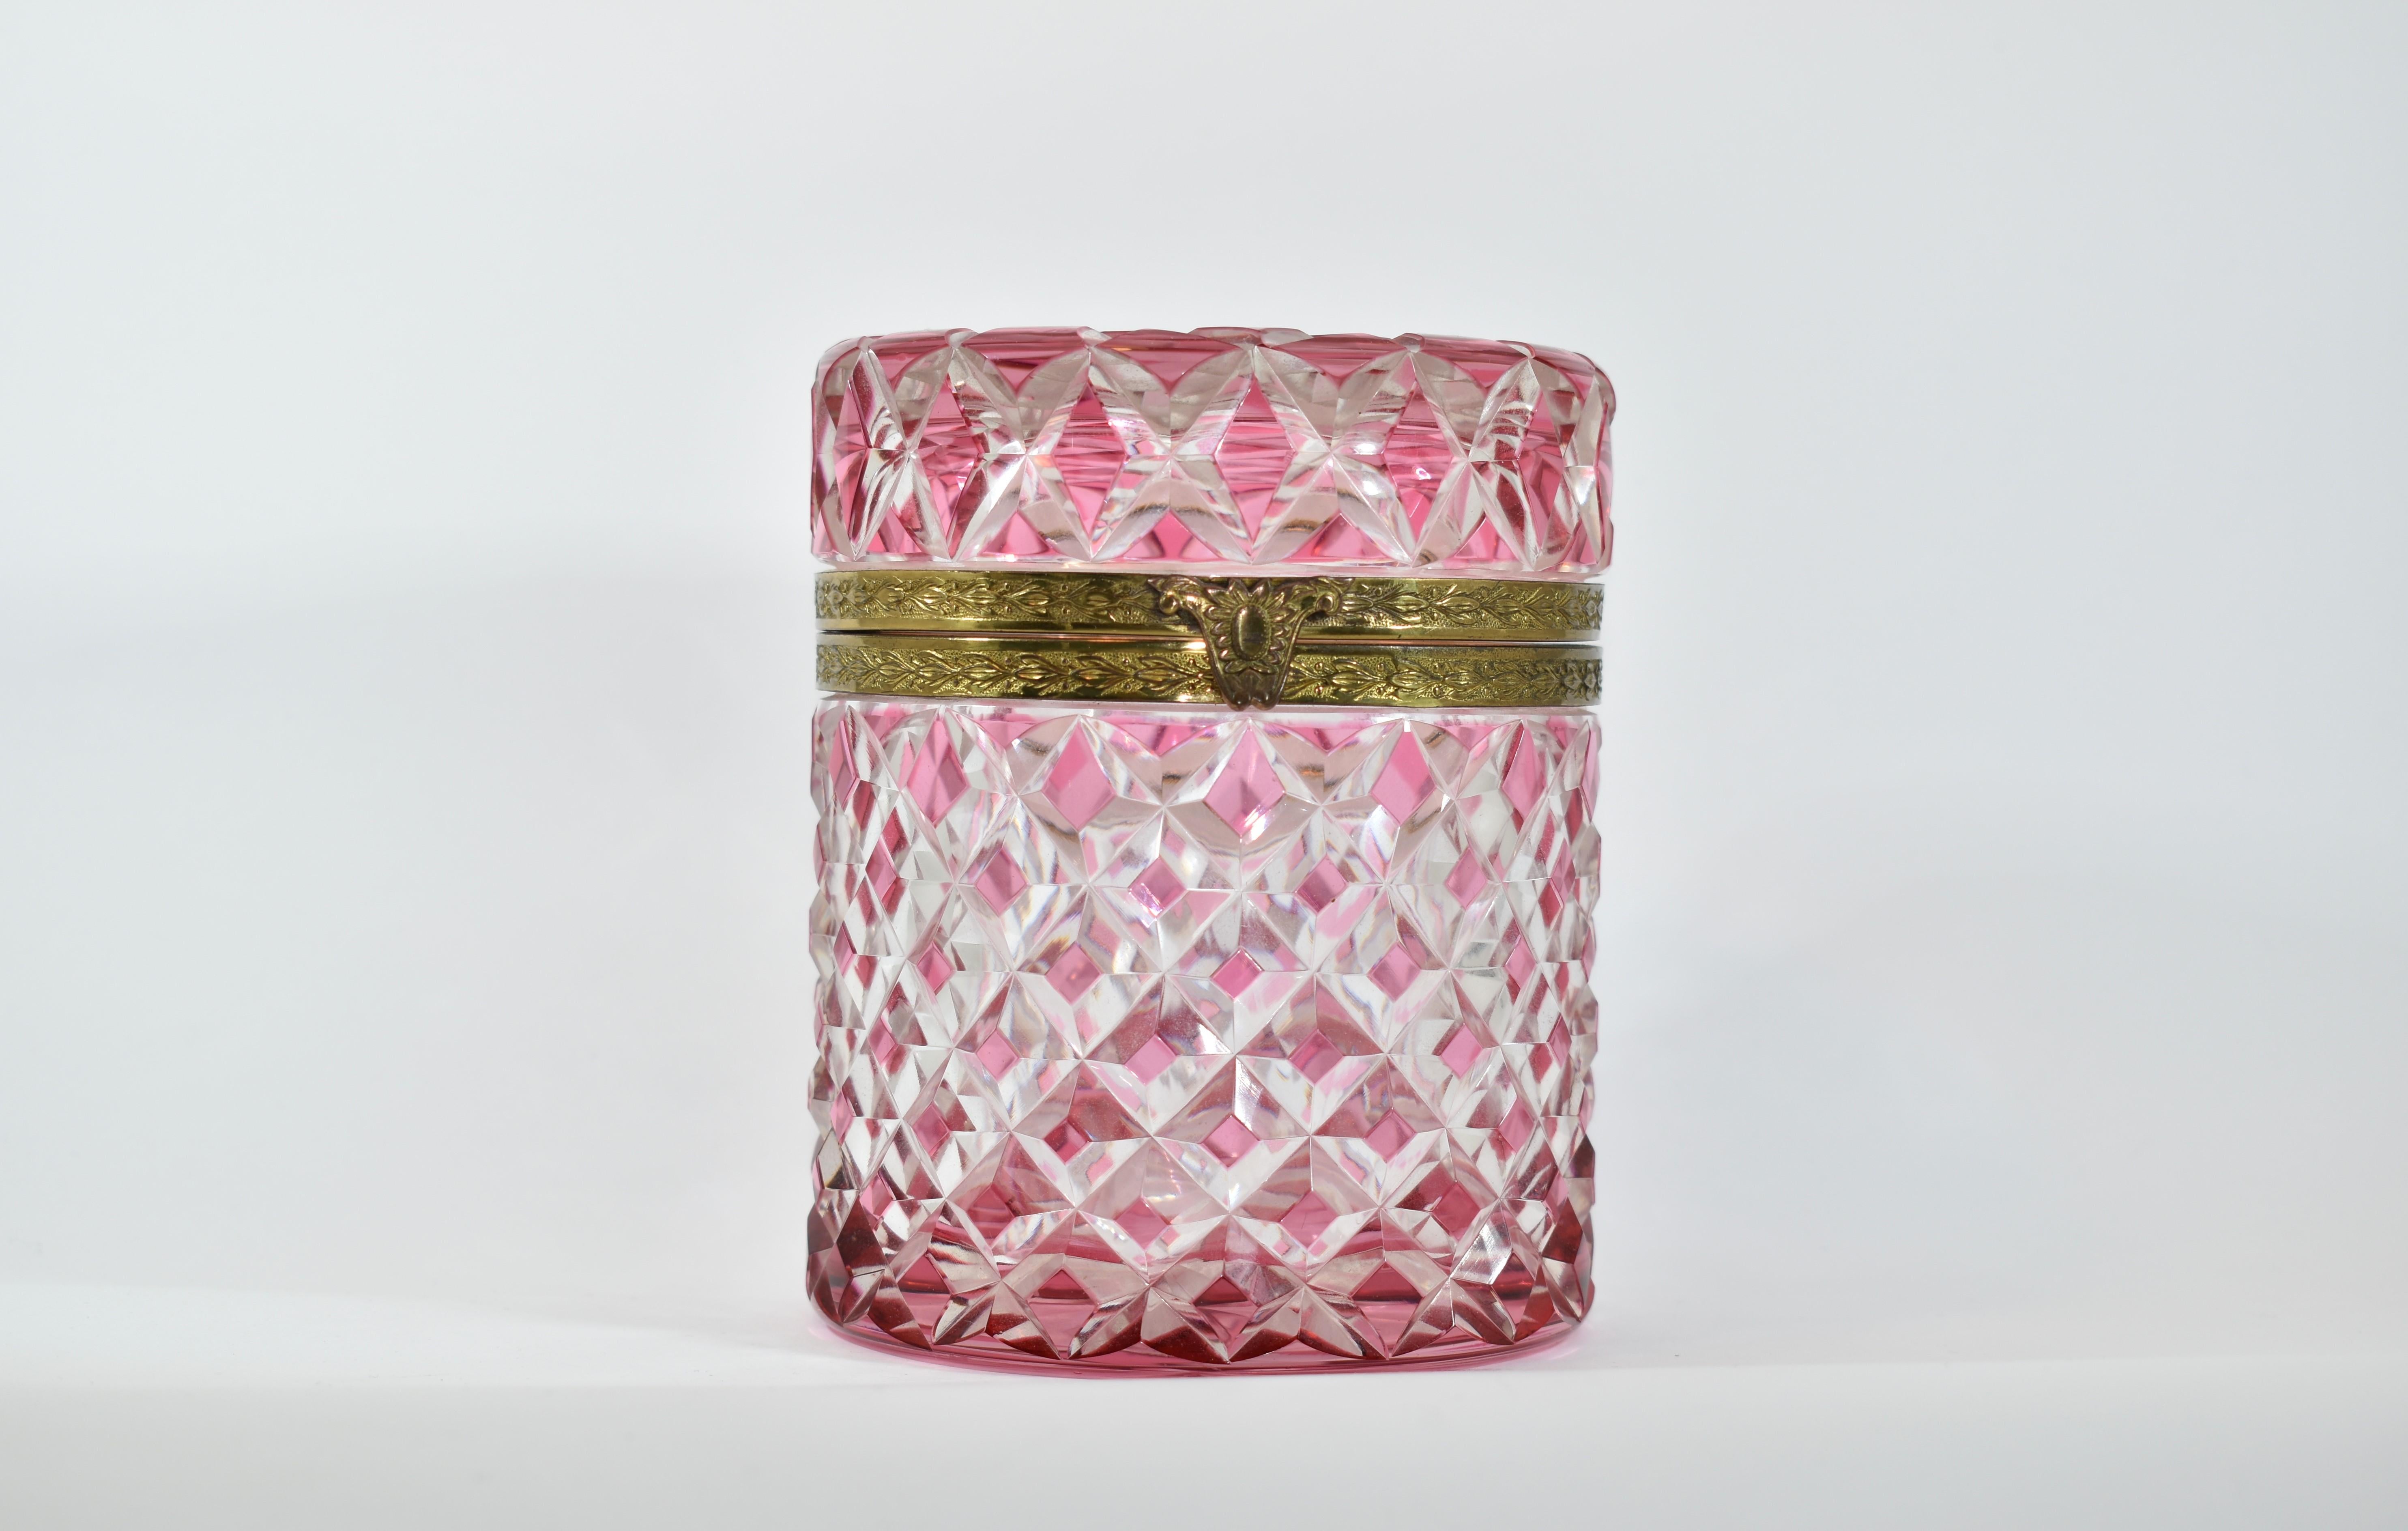 Antique richly cut crystal glass box with cranberry overlay
gilded bronze mounts
Cut with a Star Pattern Underneath.